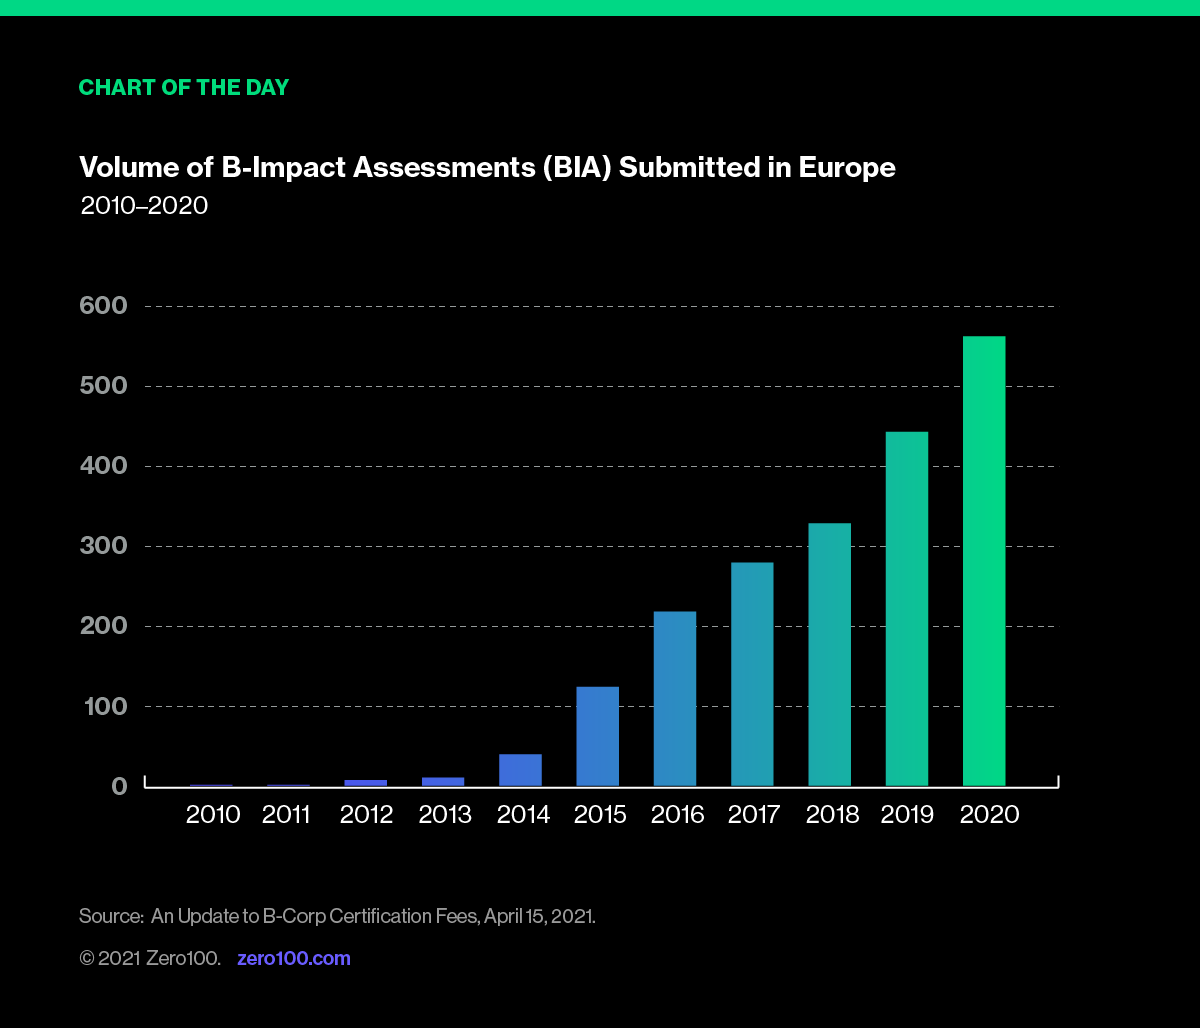 Graph depicting volume b-impact assessments (BIA) submitted in Europe. Source: An Update to B-Corp Certification Fees, April 15, 2021.